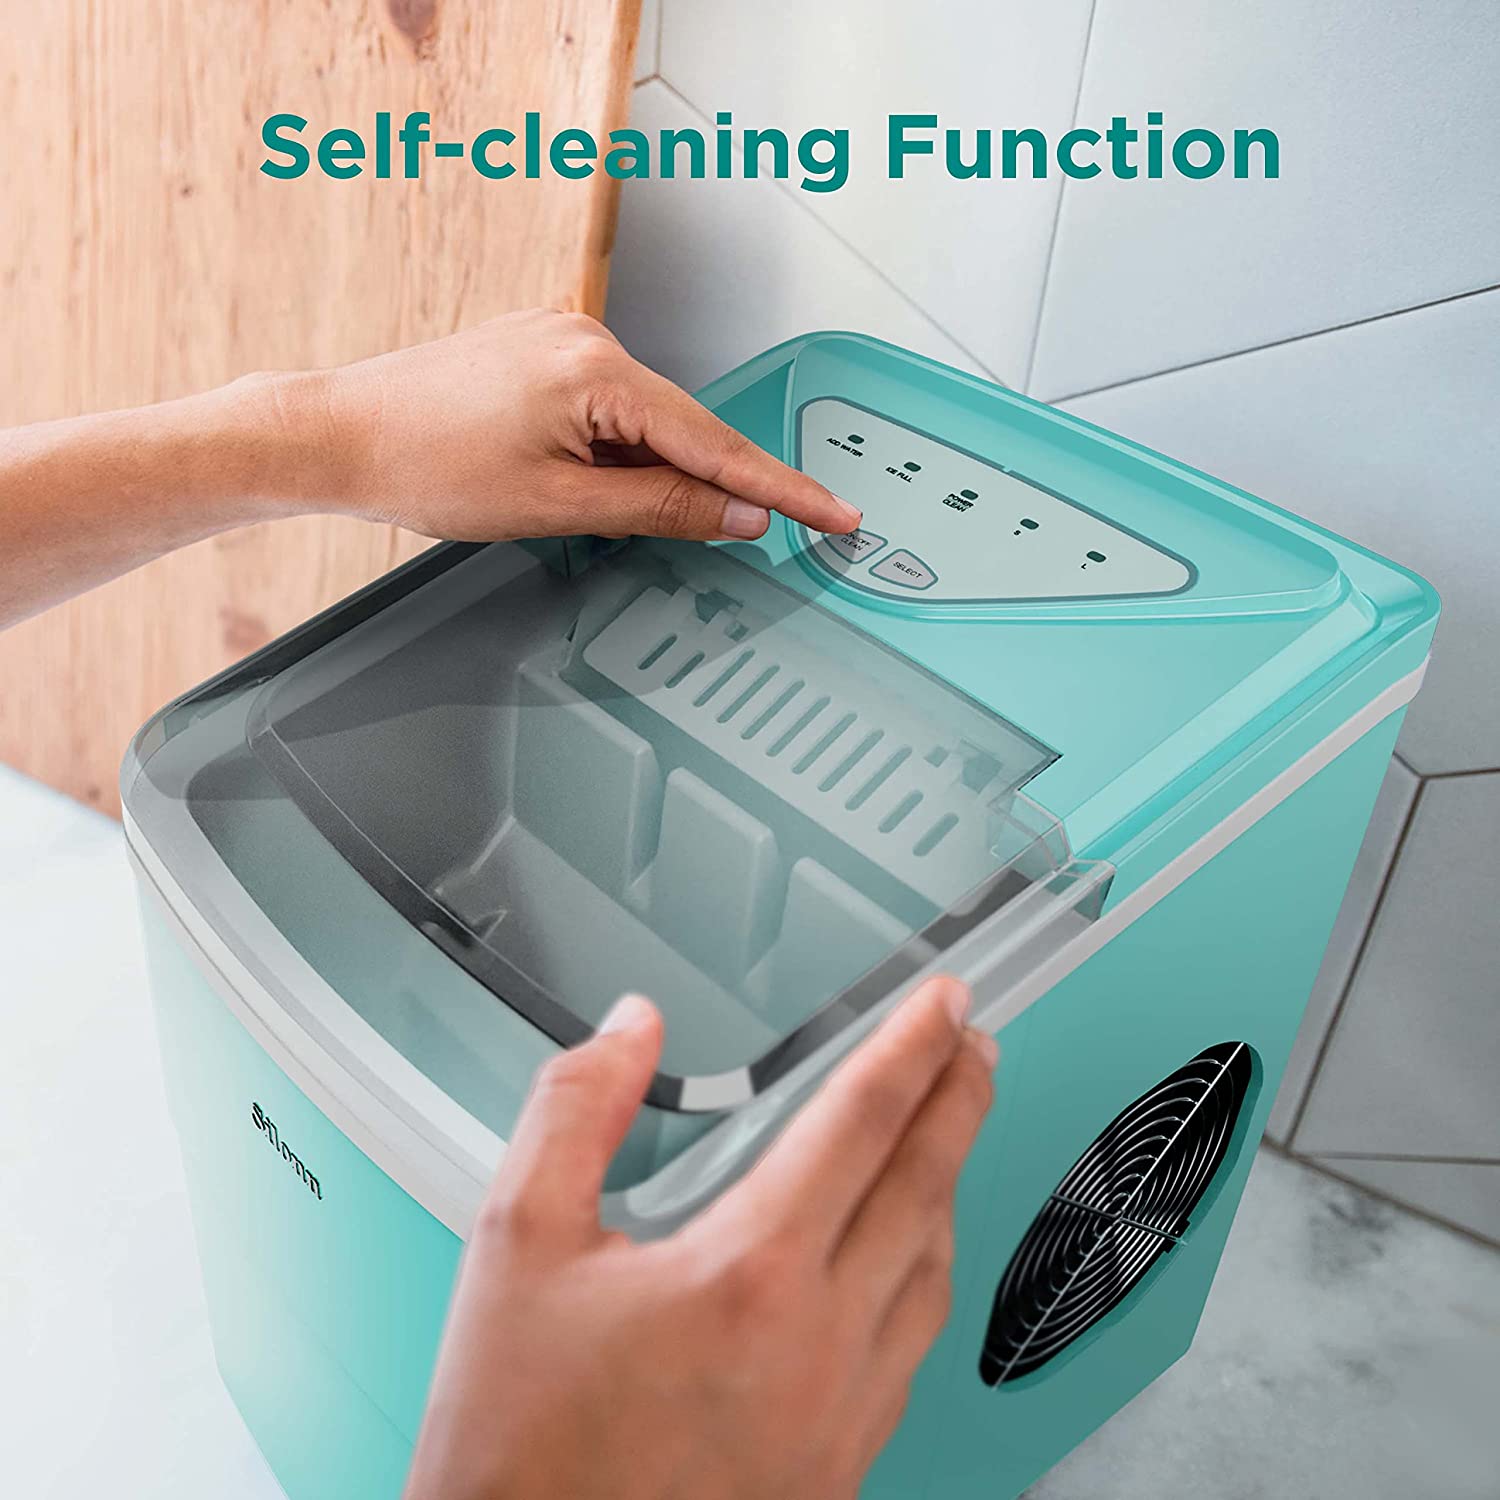 https://bigbigmart.com/wp-content/uploads/2023/05/Silonn-Ice-Makers-Countertop-9-Cubes-Ready-in-6-Mins-26lbs-in-24Hrs-Self-Cleaning-Ice-Machine-with-Ice-Scoop-and-Basket-2-Sizes-of-Bullet-Ice-for-Home-Kitchen-Office-Bar-Party-Green5.jpg